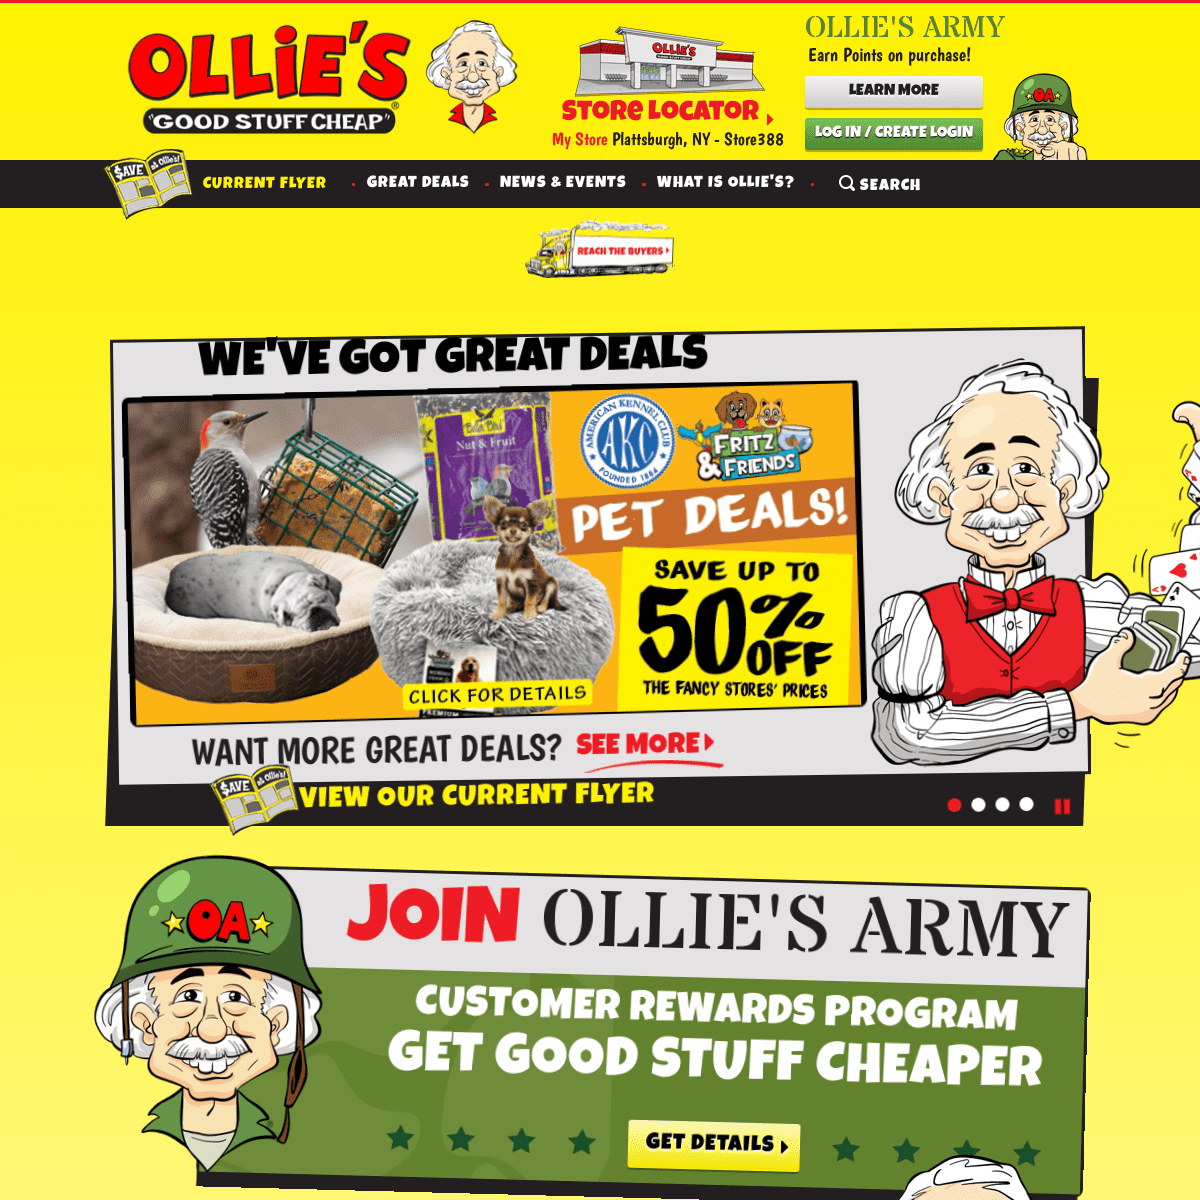 A complete backup of https://ollies.us